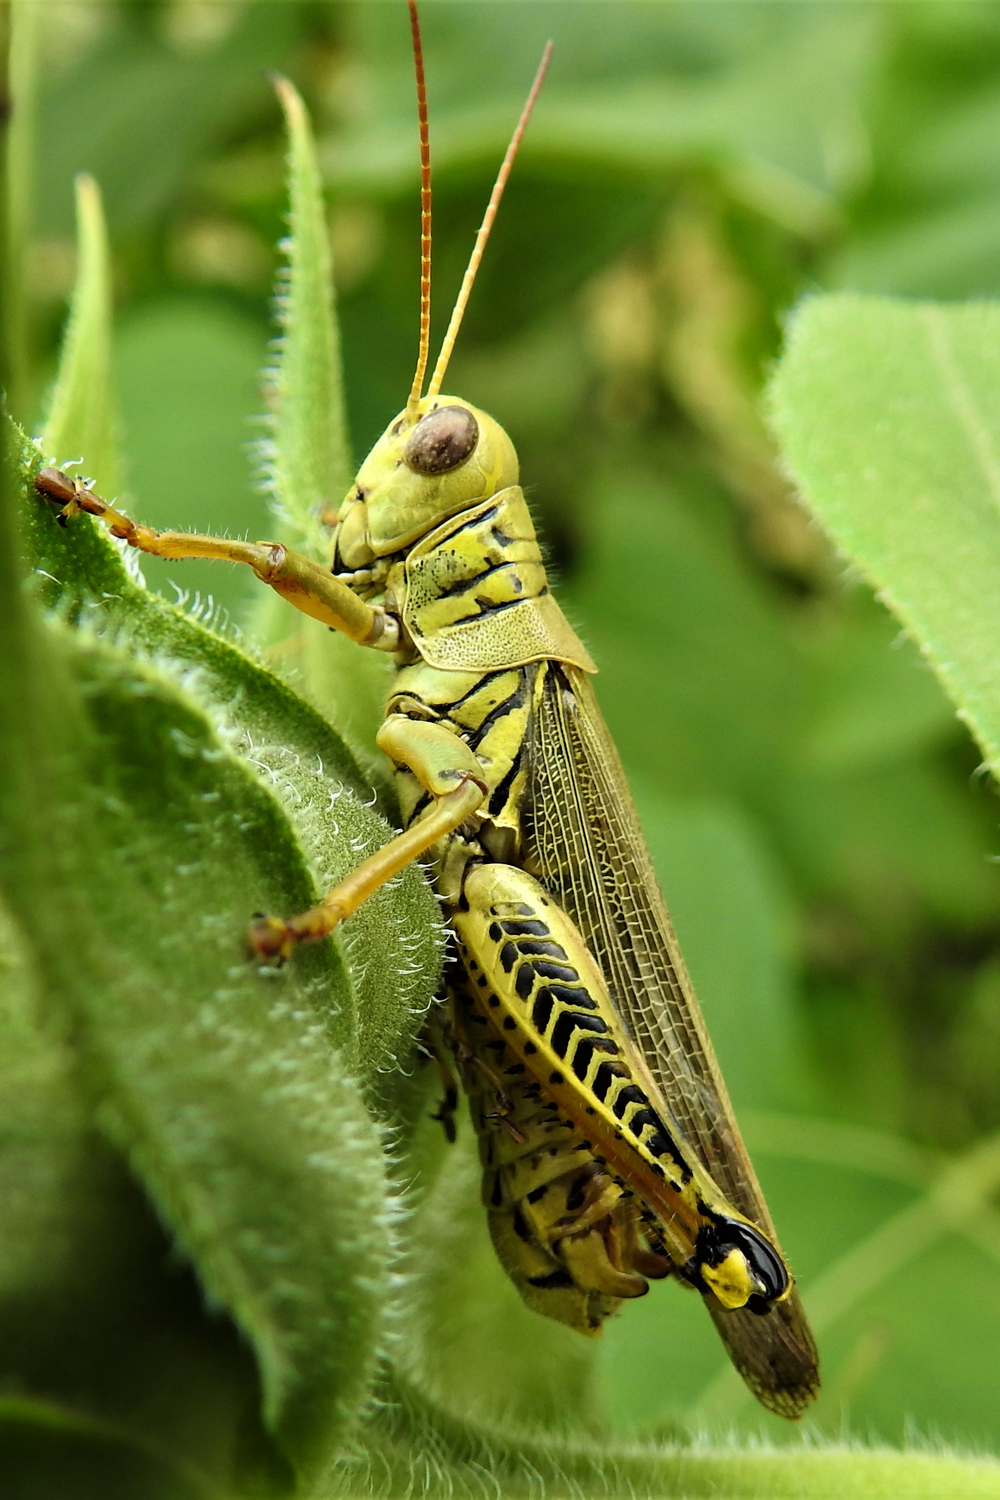 The Modern Symbolism of Grasshoppers